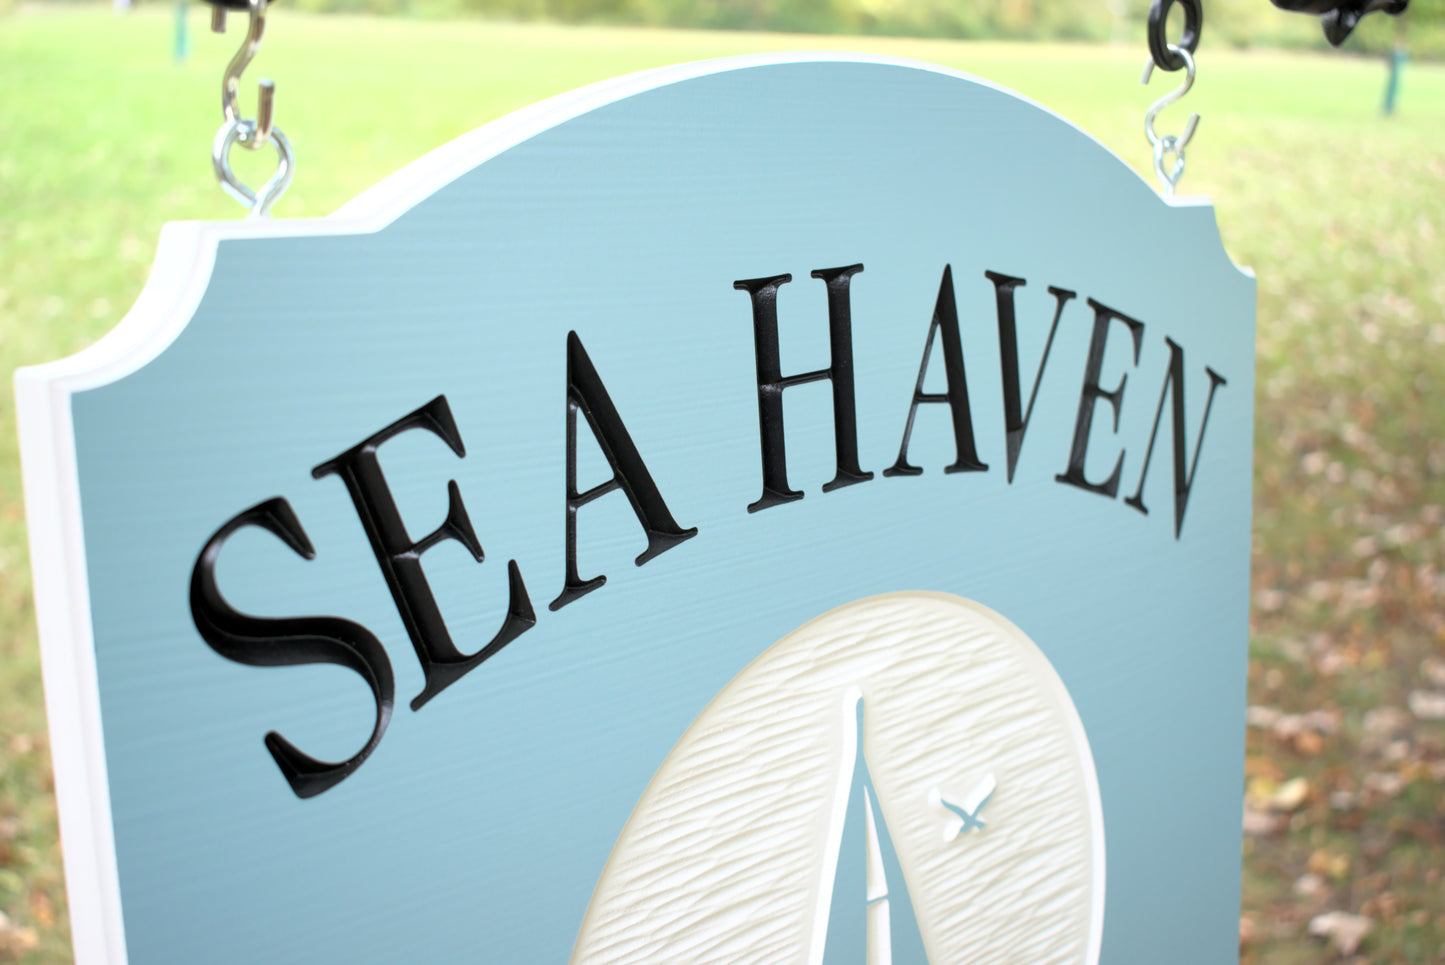 Vacation Home Sign With Address and Sailboat Design